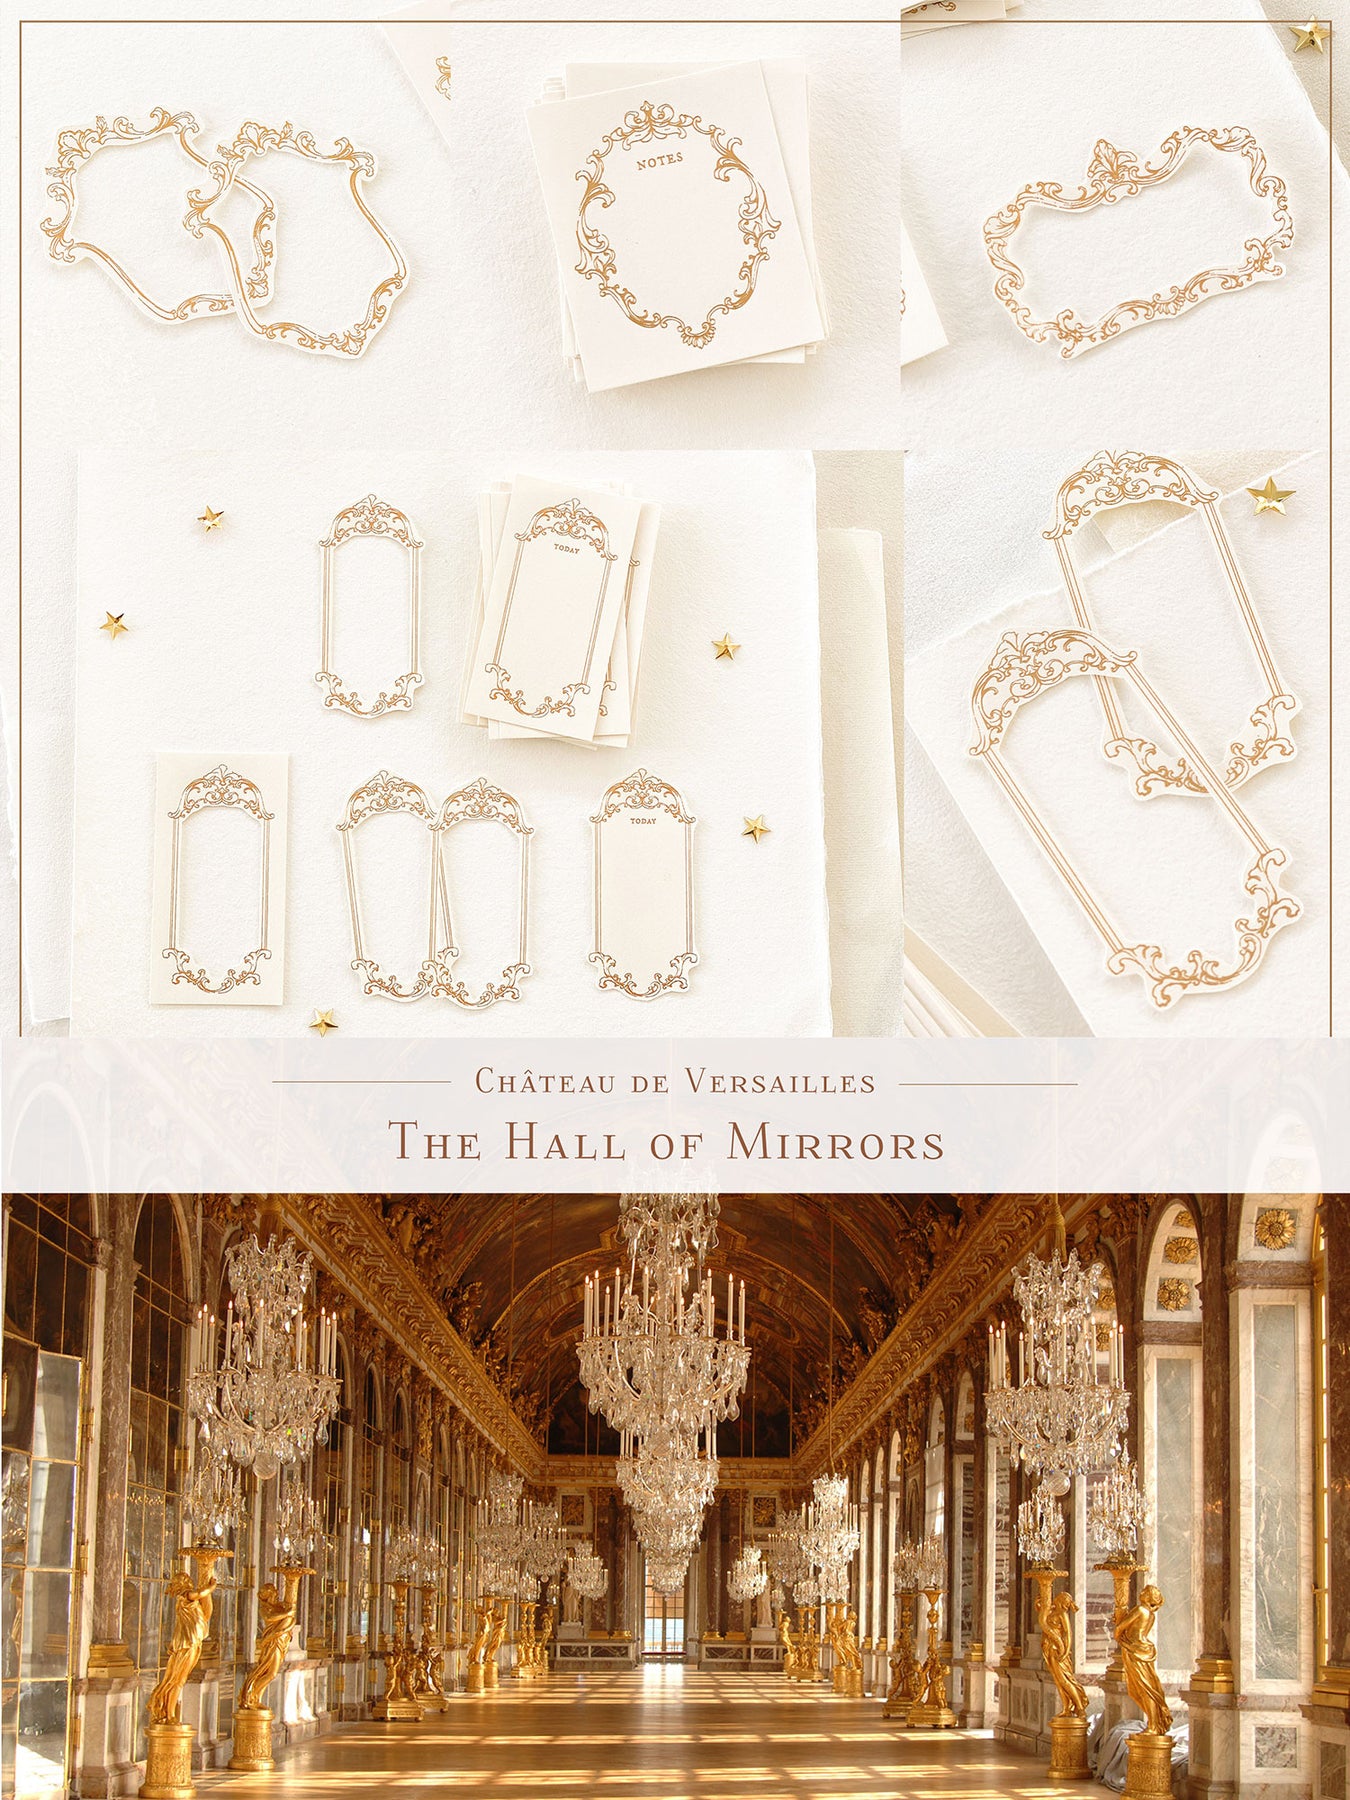 The Hall of Mirrors - Gold Frames Collection